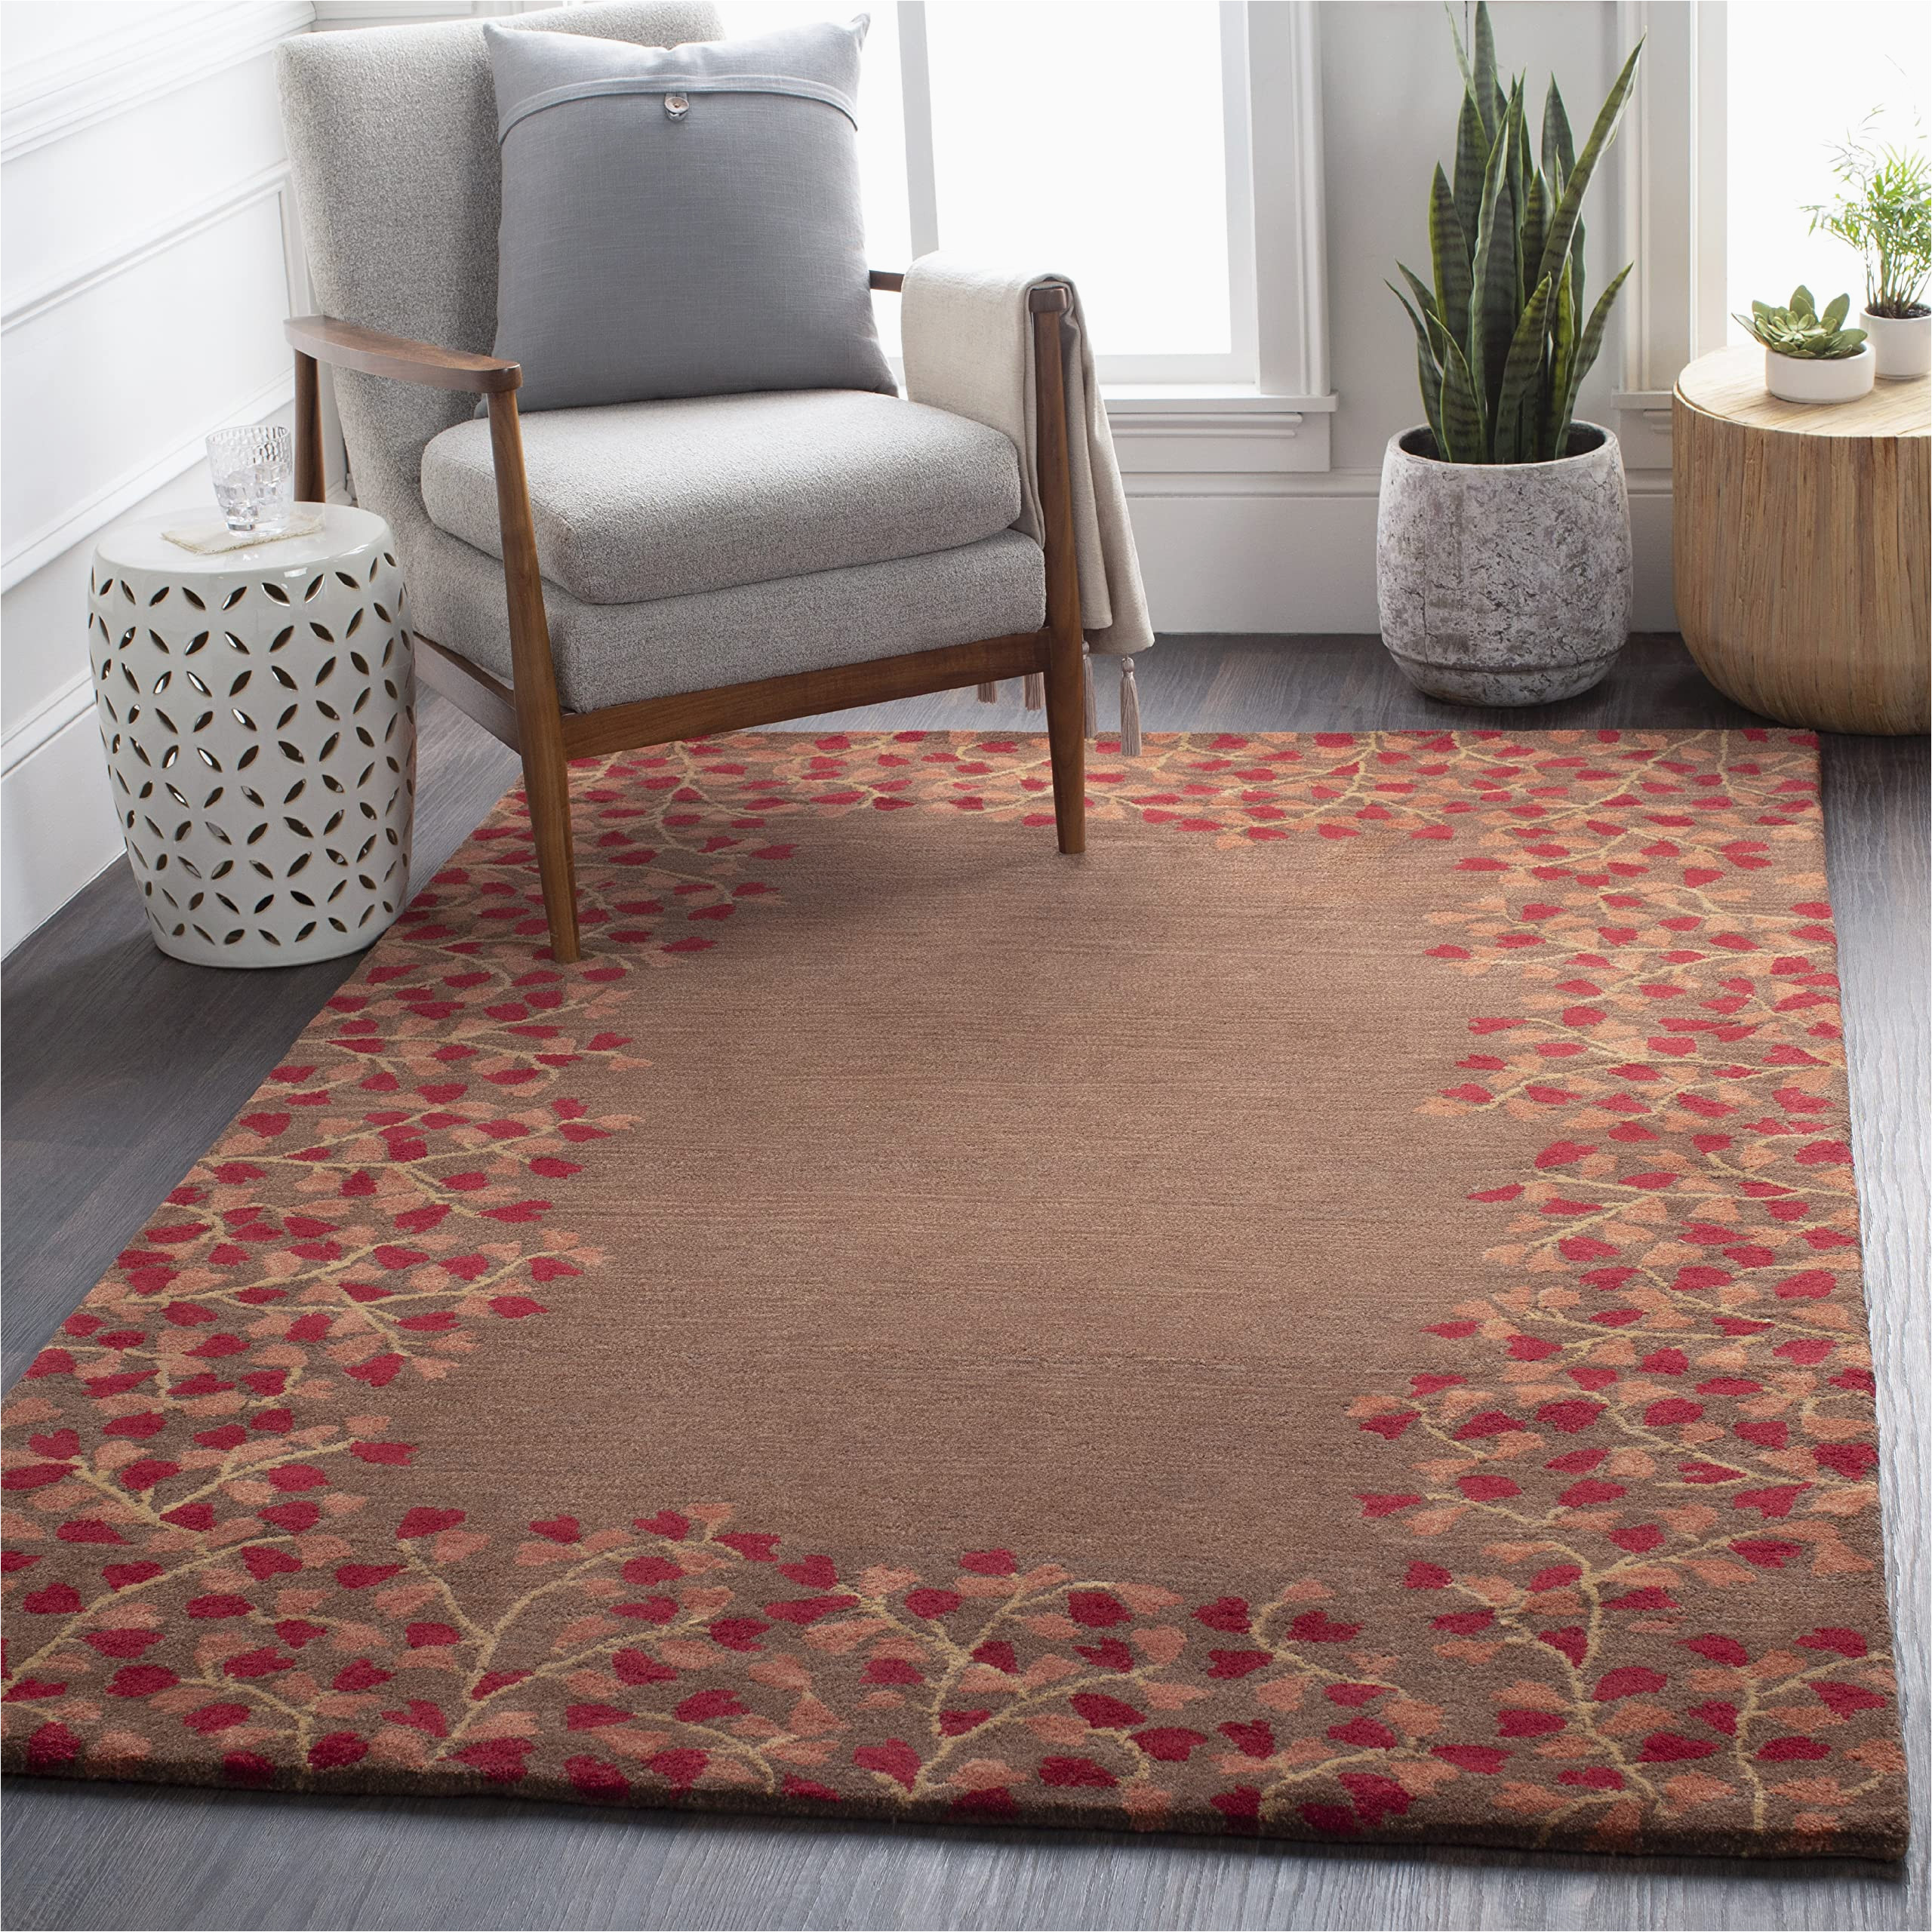 Beige and Burgundy area Rug Mark&day area Rugs, 9×12 Zuuk Transitional Burgundy area Rug Brown Red Beige Carpet for Living Room, Bedroom or Kitchen (9′ X 12′)